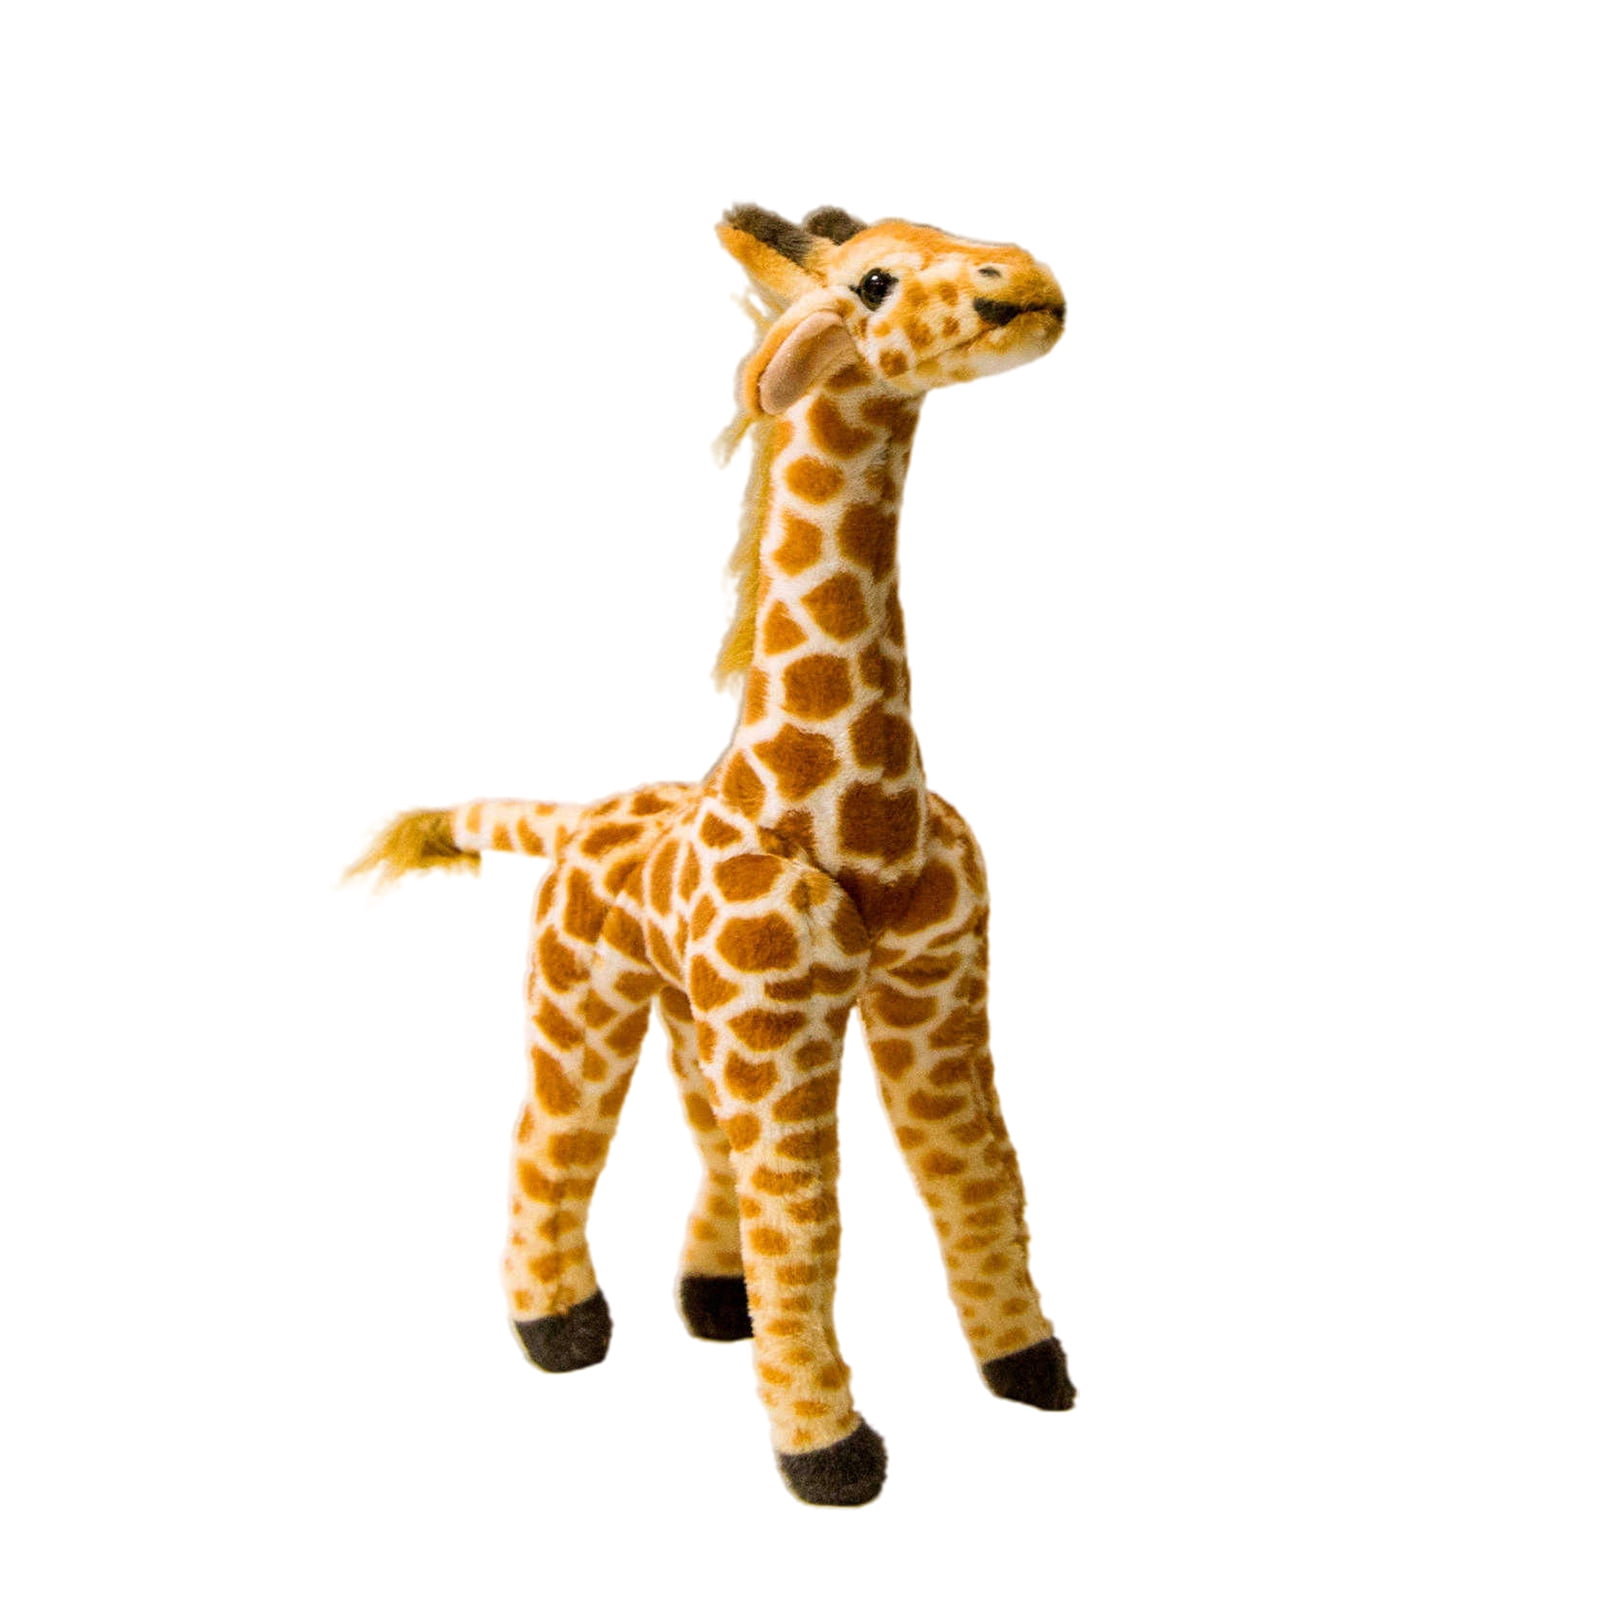 Details about   Soft and cuddly plush toy giraffe